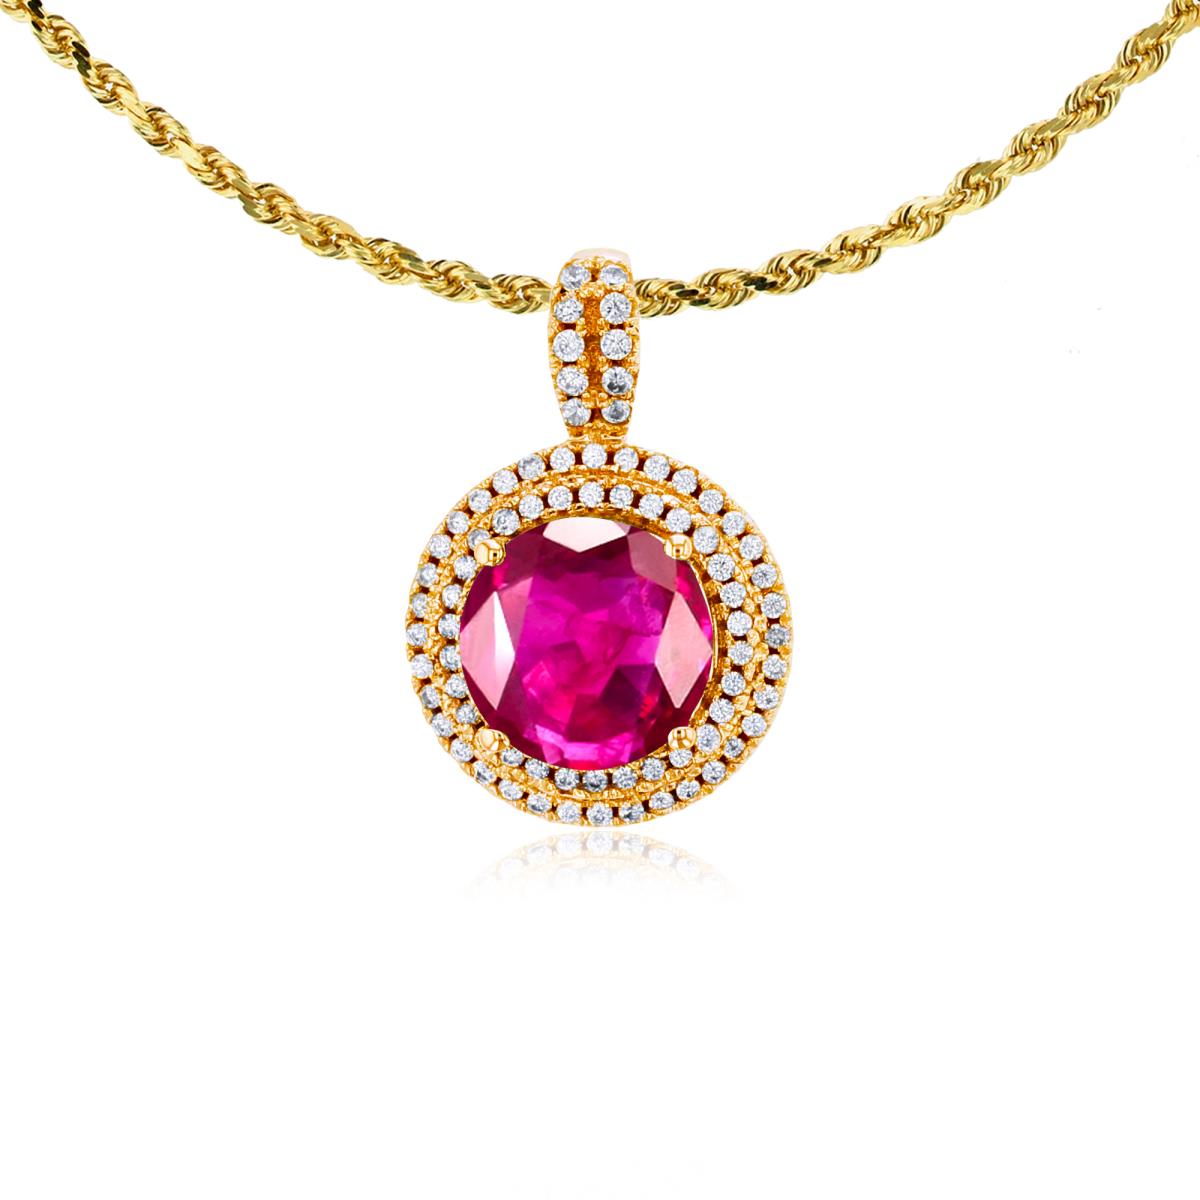 14K Yellow Gold 7mm Round Glass Filled Ruby & 0.25 CTTW Diamonds Double Halo 18" Rope Chain Necklace